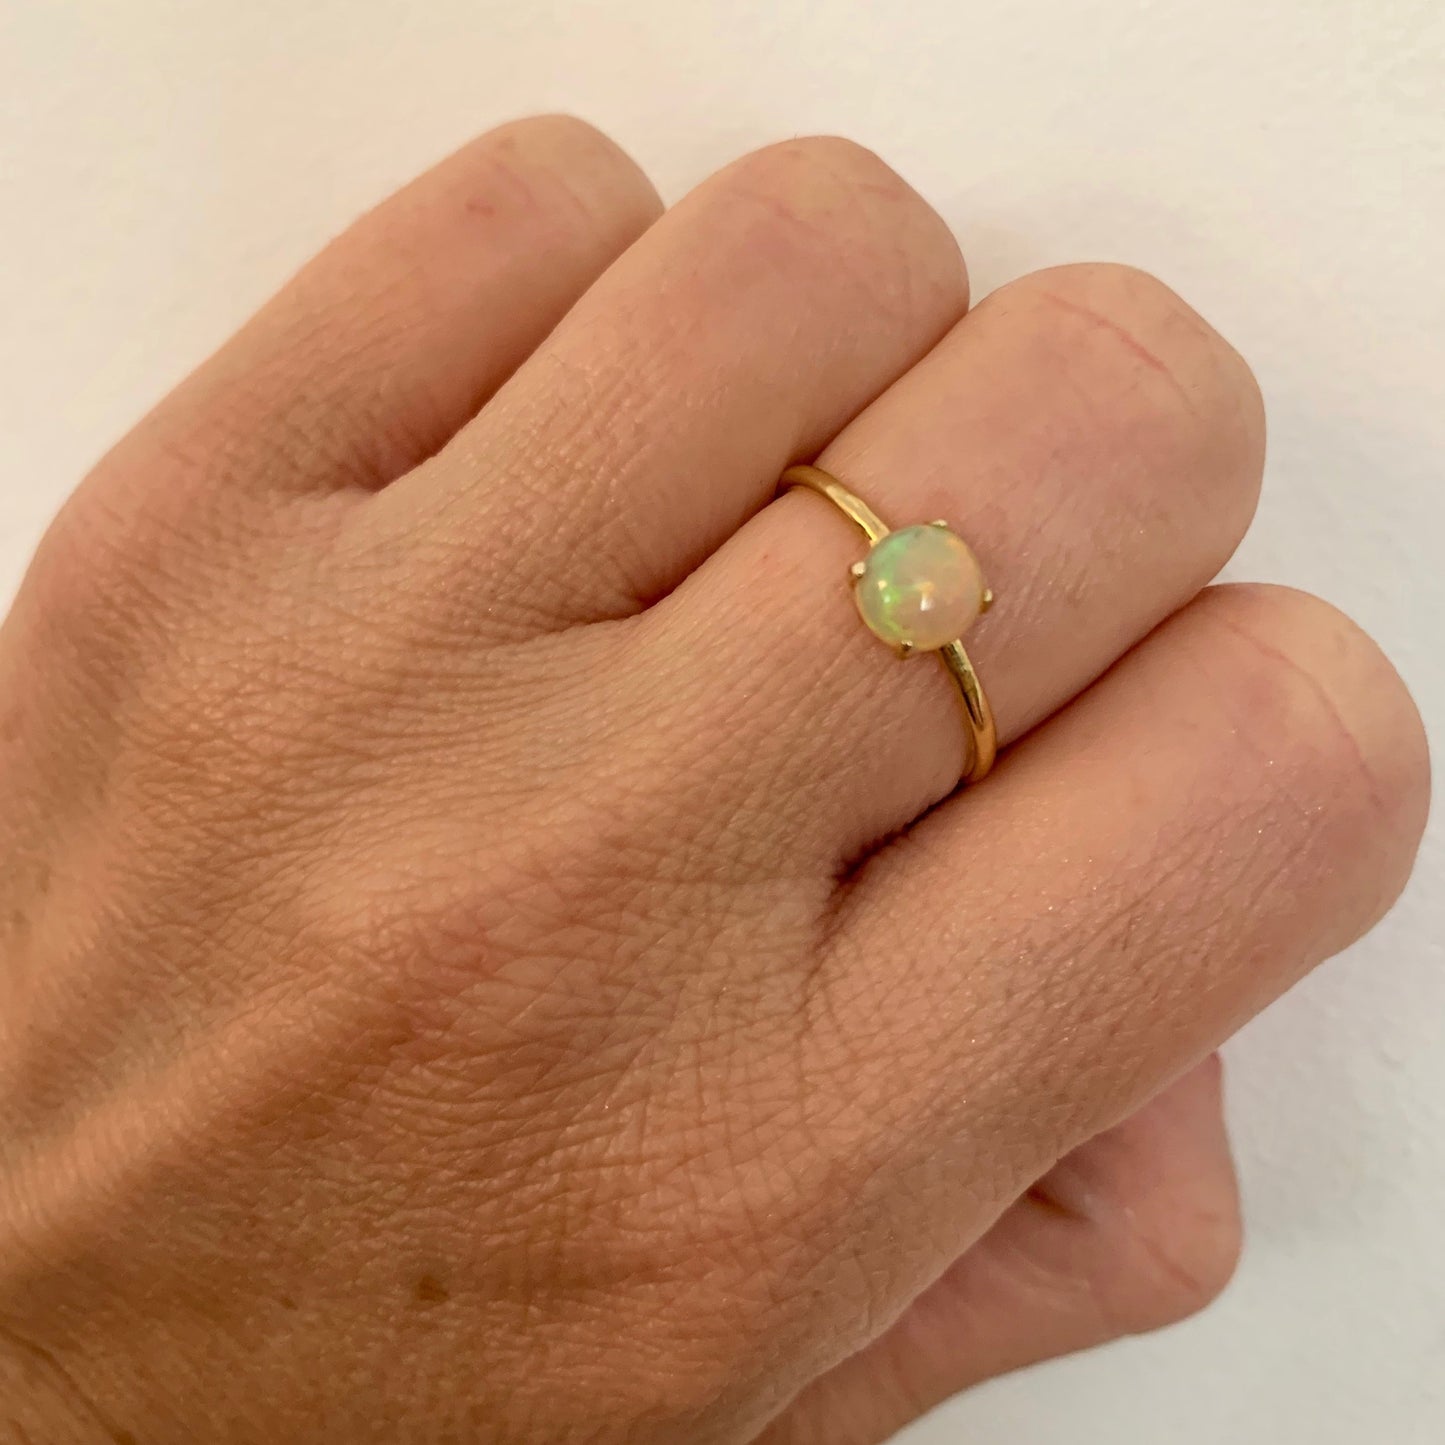 The Classic- Petite Opal Ring